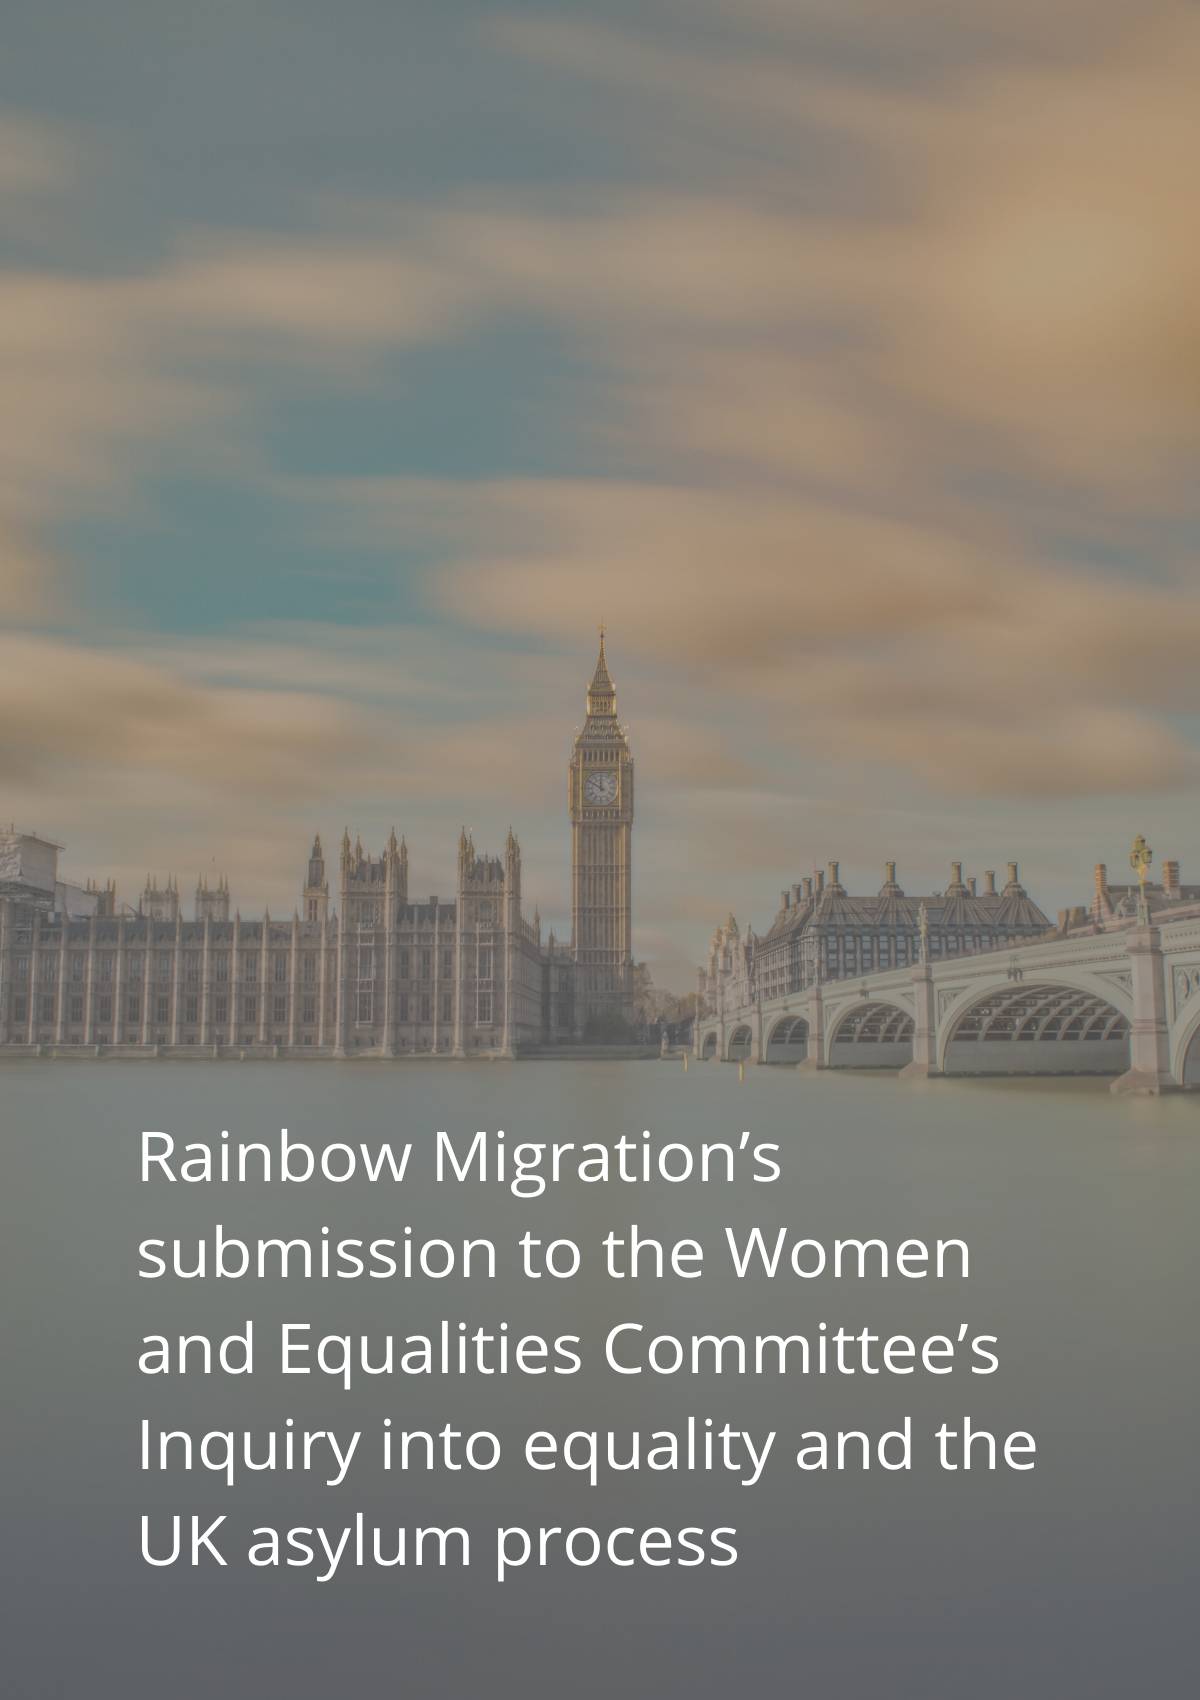 Rainbow migration's submission to the women's and equality into equality.